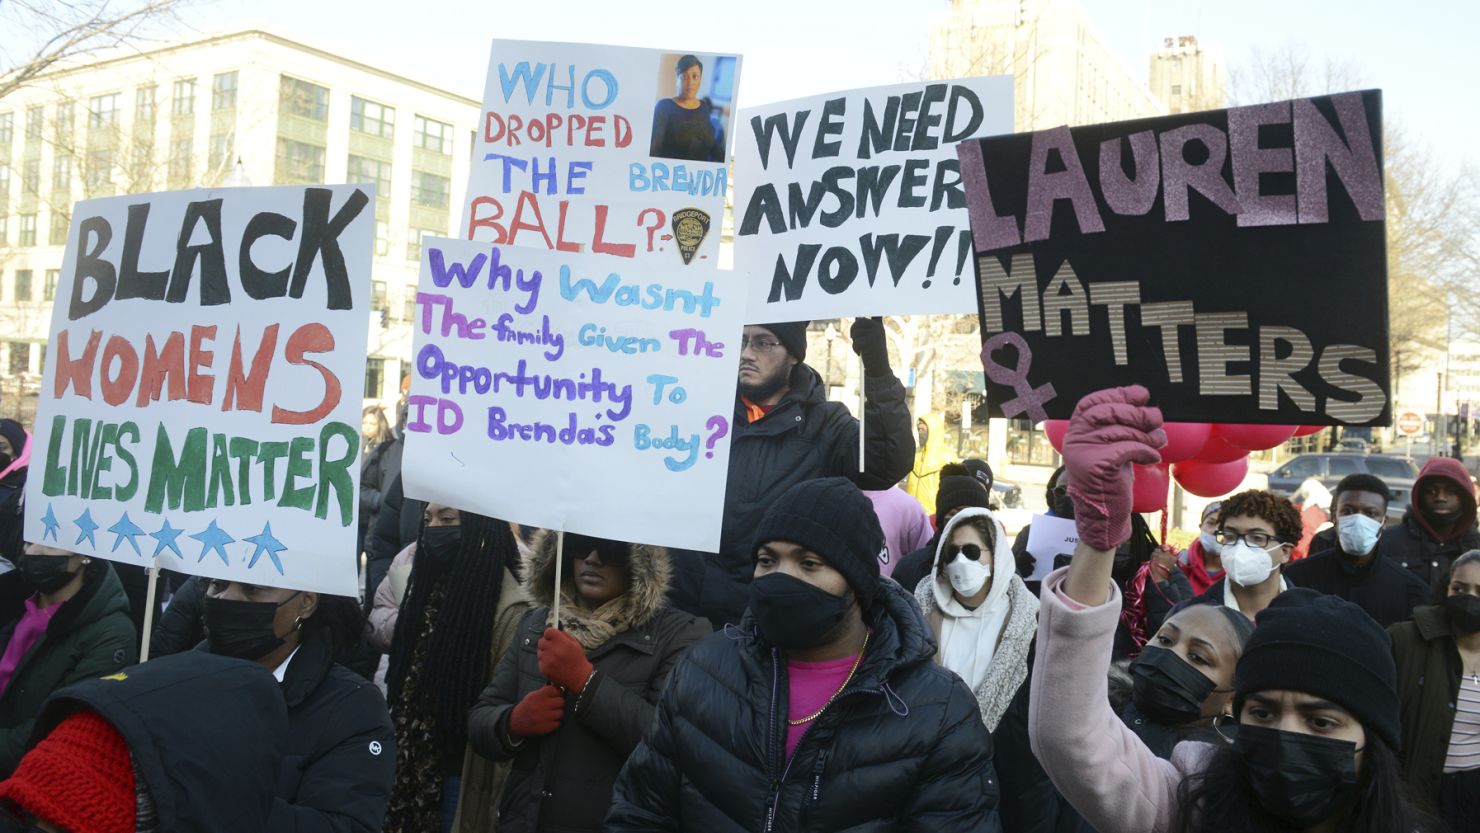 Family and friends of Lauren Smith-Fields gathered for a protest march in her memory in Bridgeport, Connecticut, on January 23, 2022.